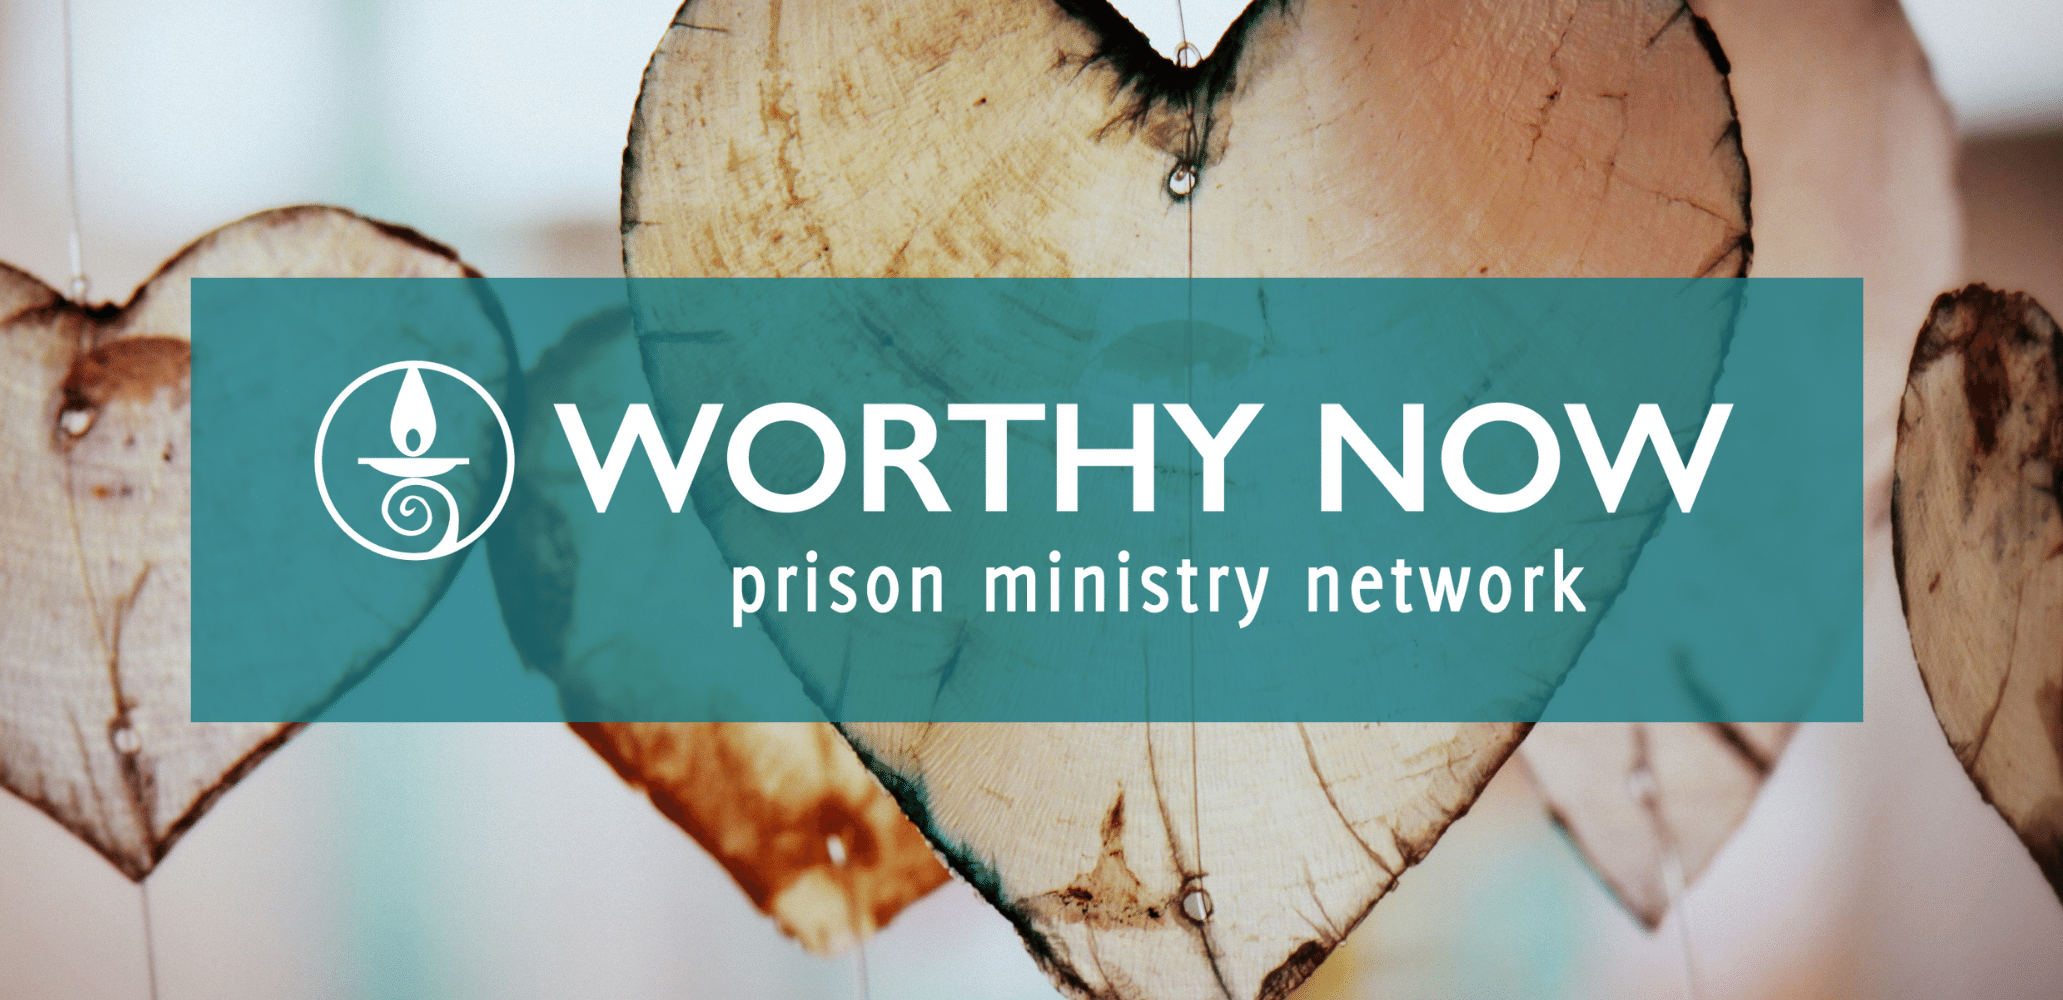 Hearts hanging in background with Worthy Now Prison Ministry Network logo in foreground